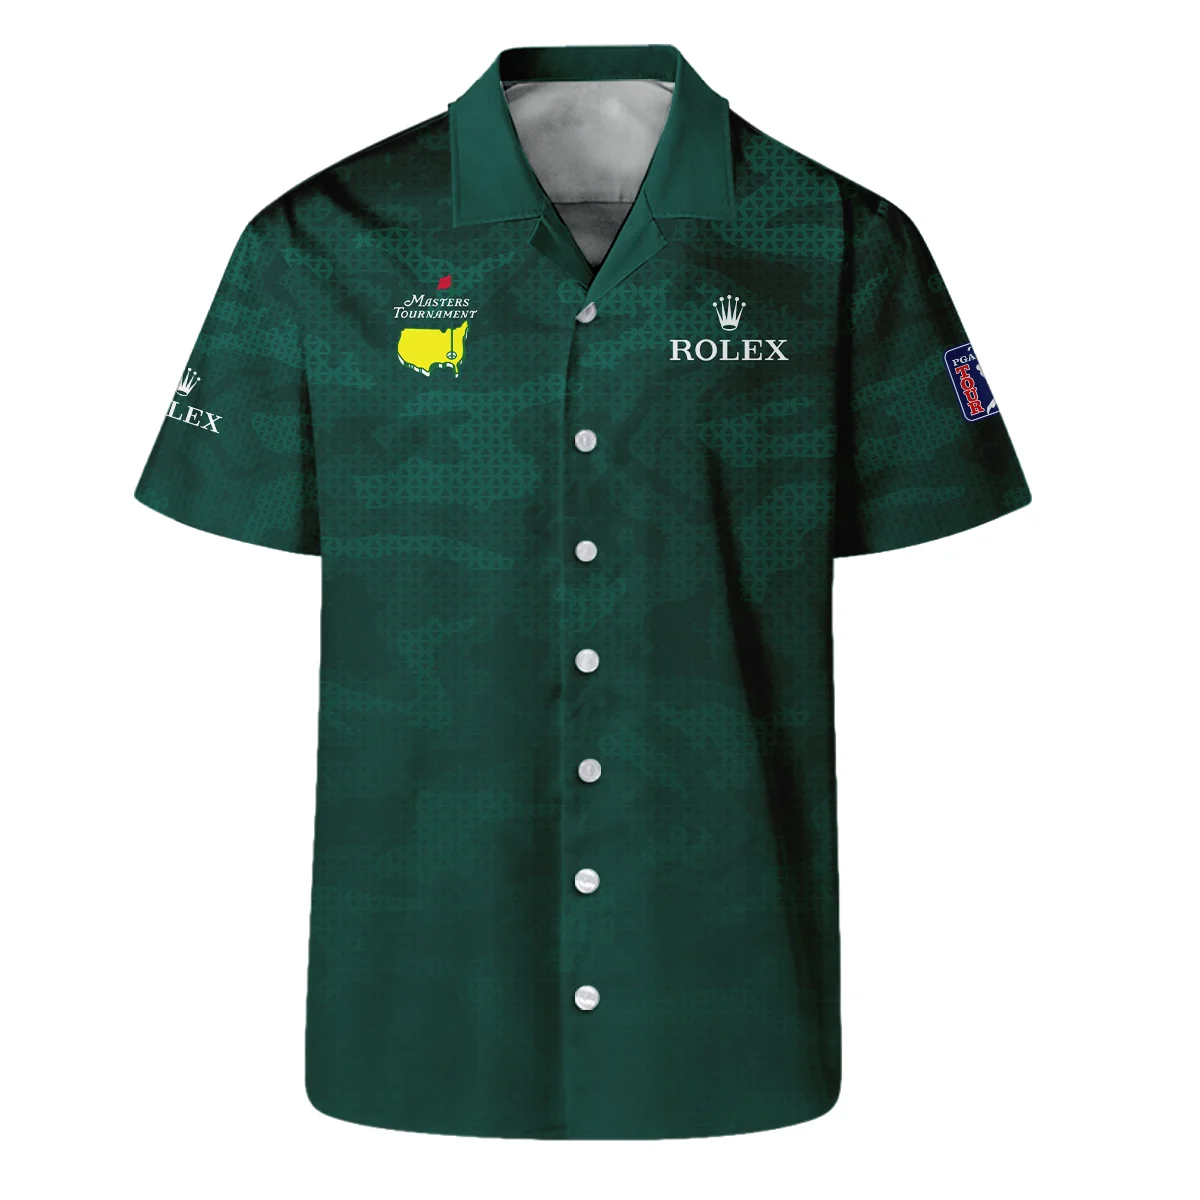 Masters Tournament Rolex Camo Sport Green Abstract Long Polo Shirt Style Classic Long Polo Shirt For Men